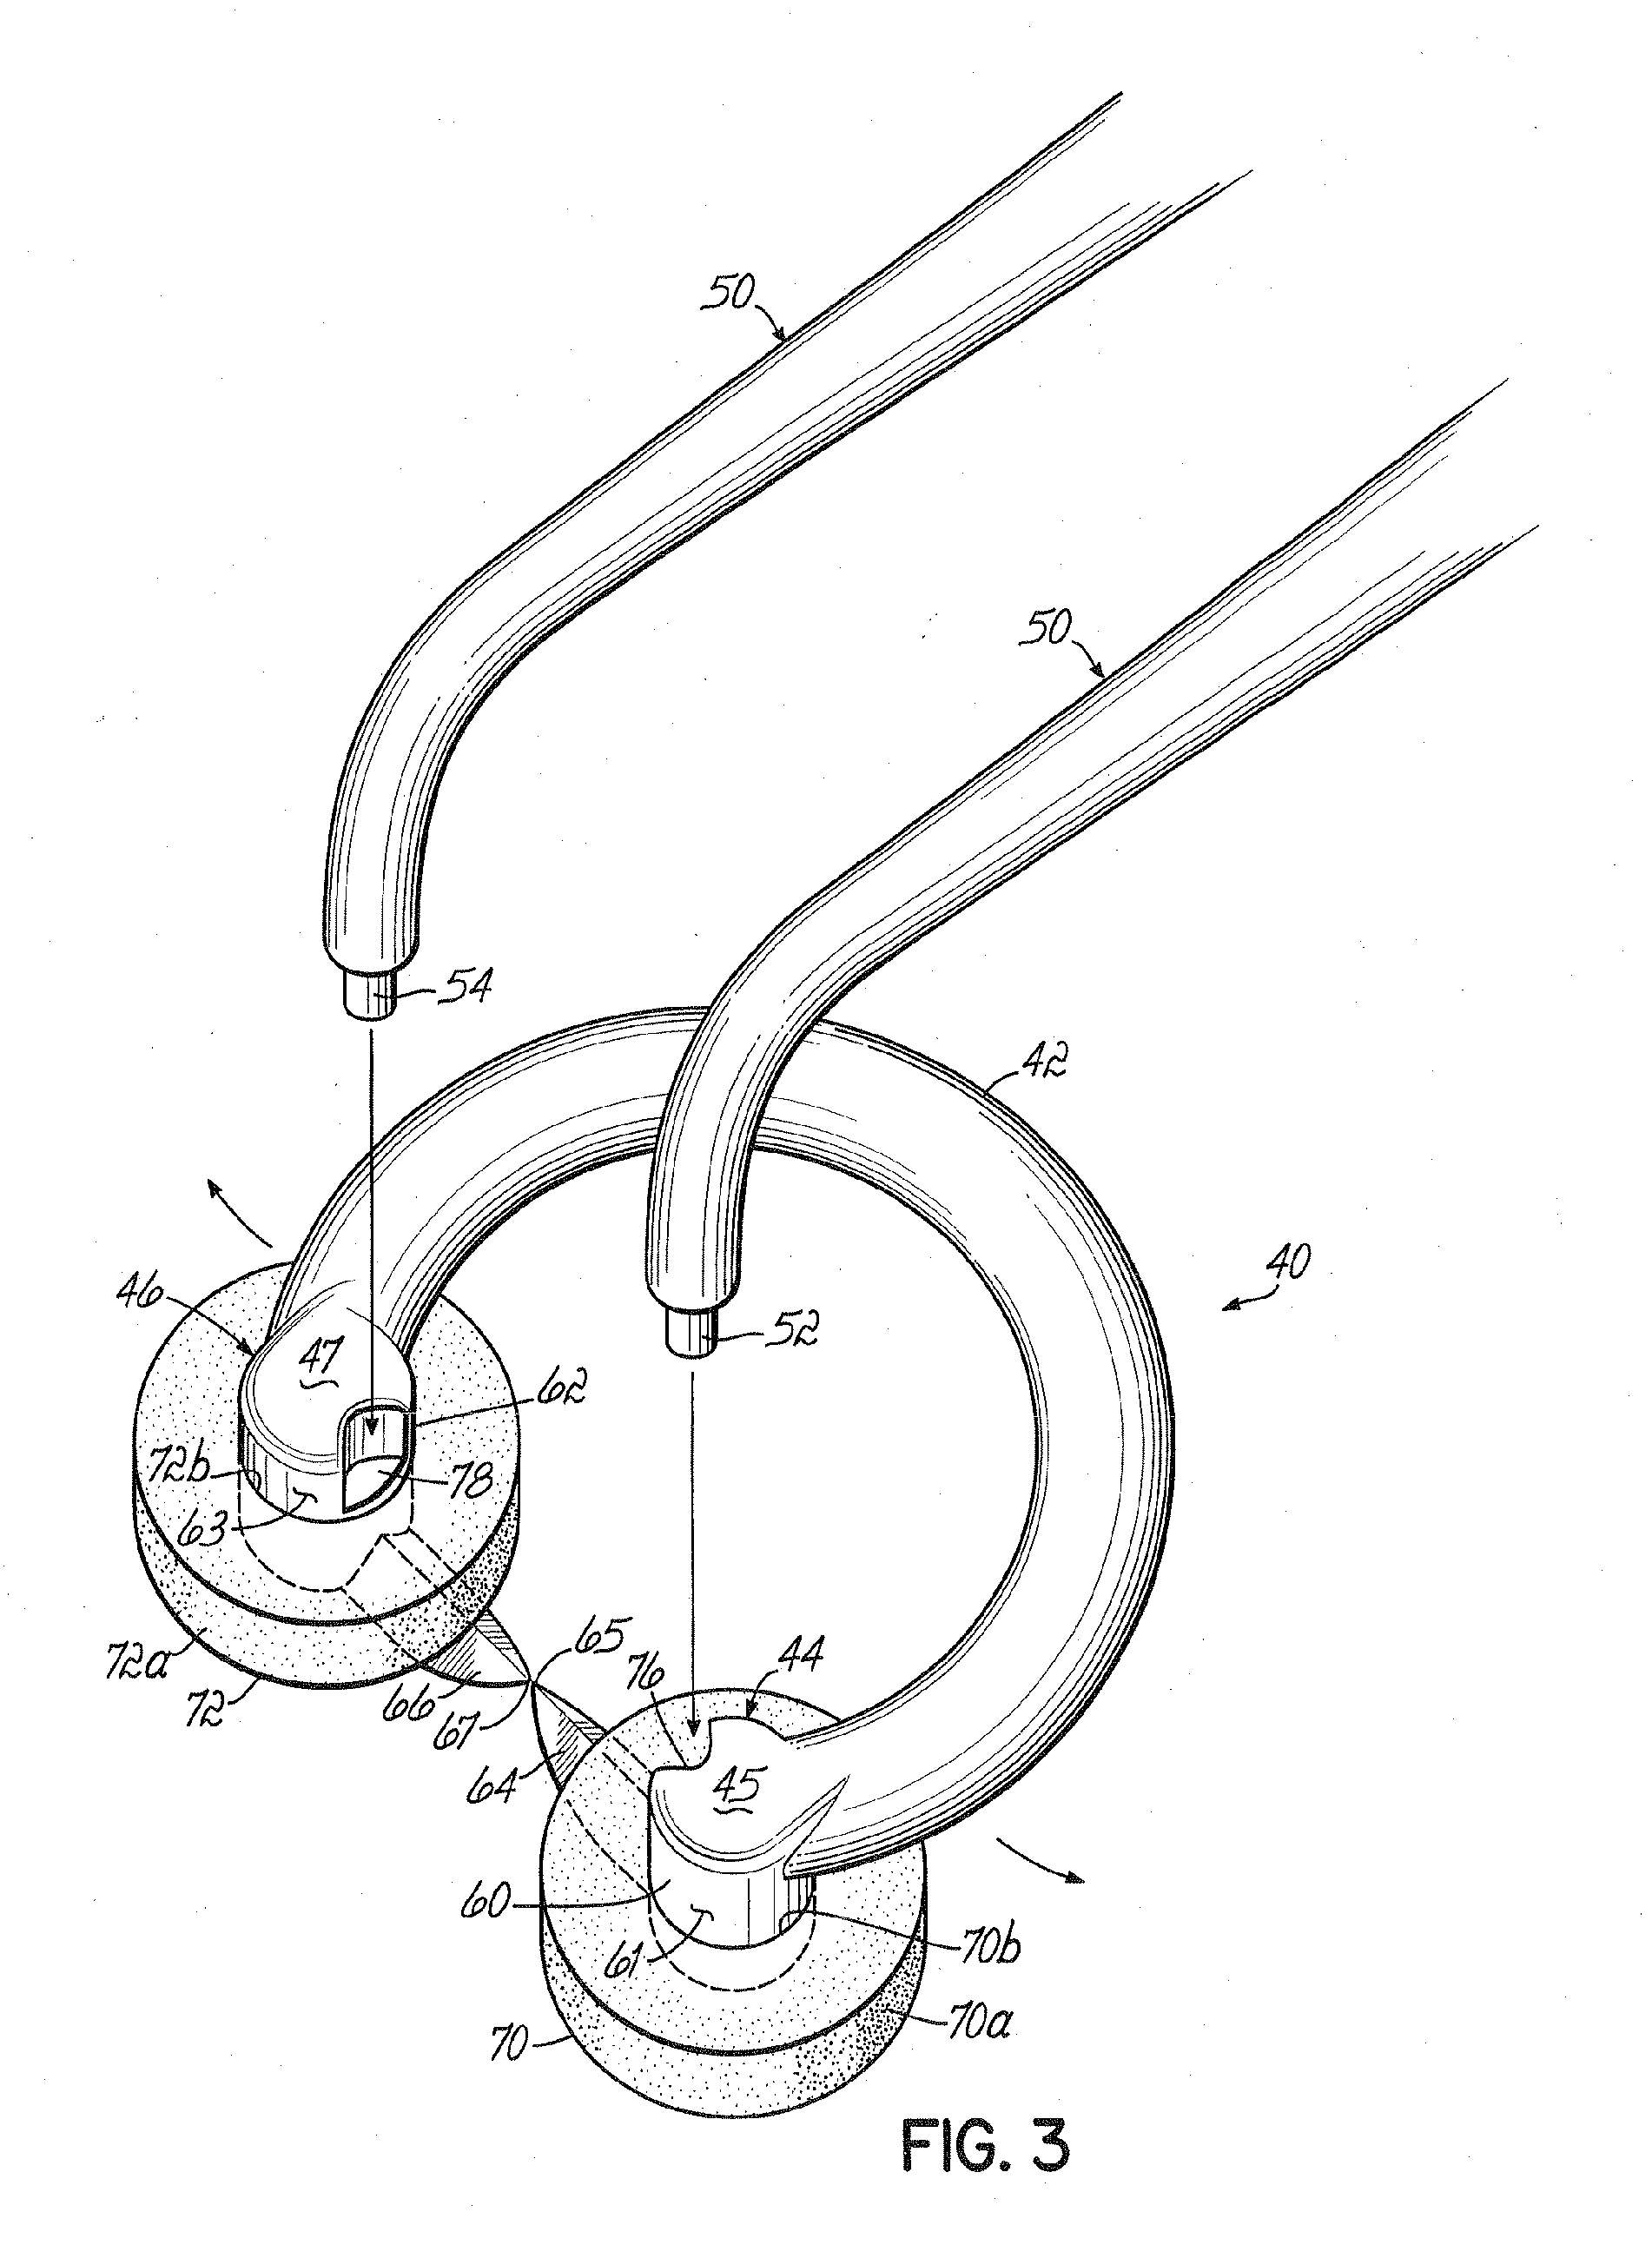 Device and system for separation and matrix retention and adaptation during dental restoration and method for preparing tooth using system